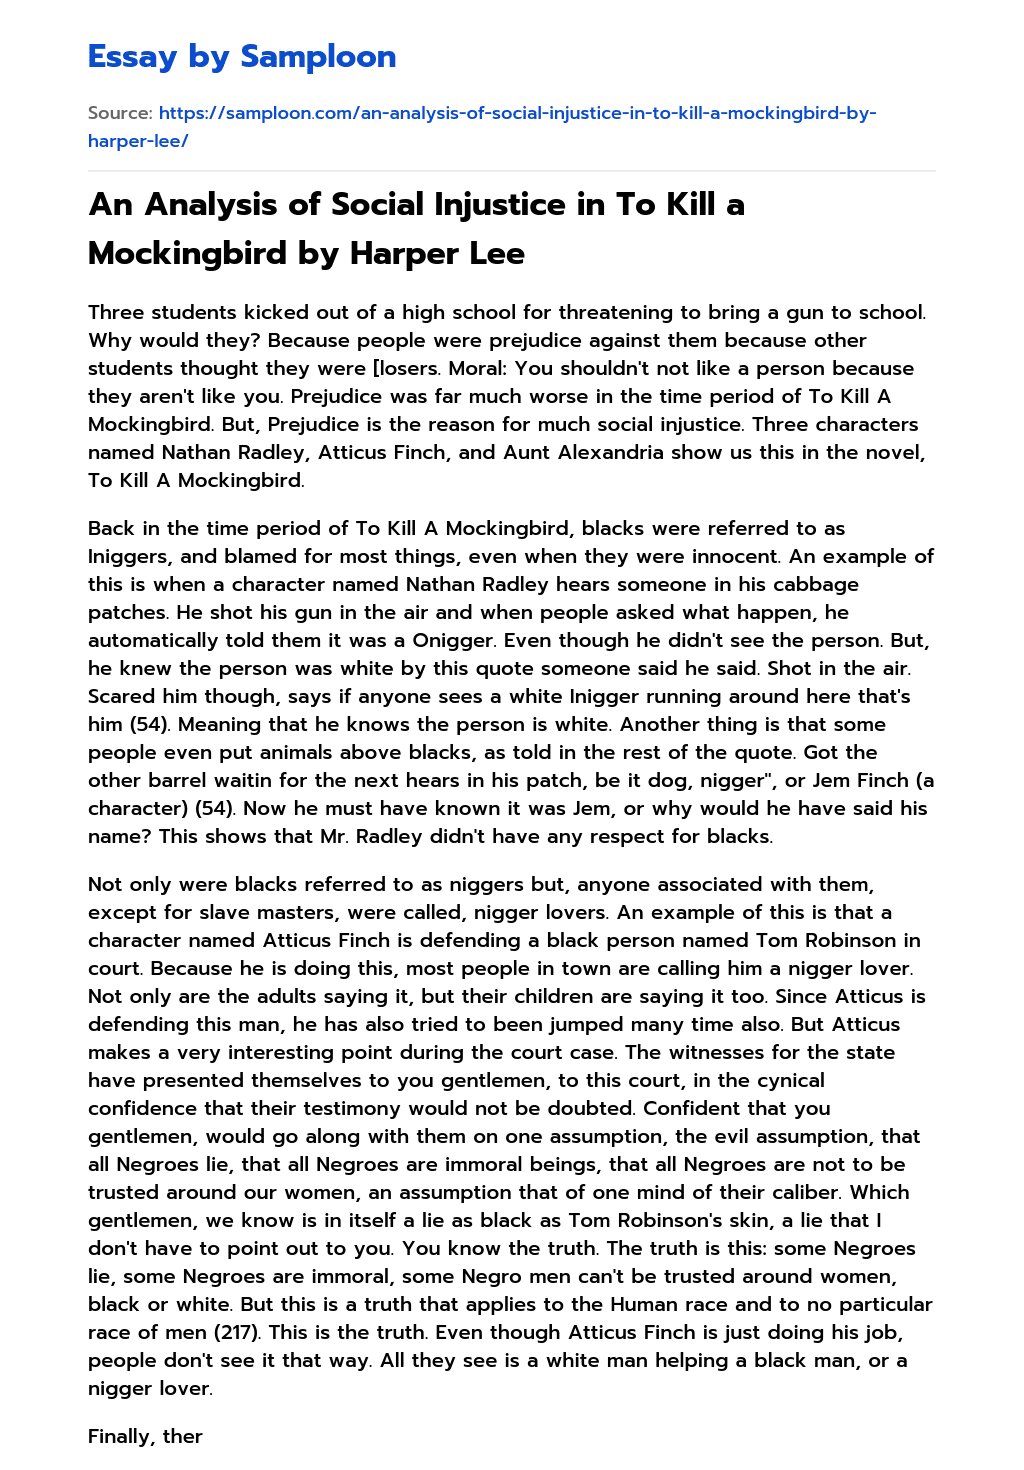 An Analysis of Social Injustice in To Kill a Mockingbird by Harper Lee essay